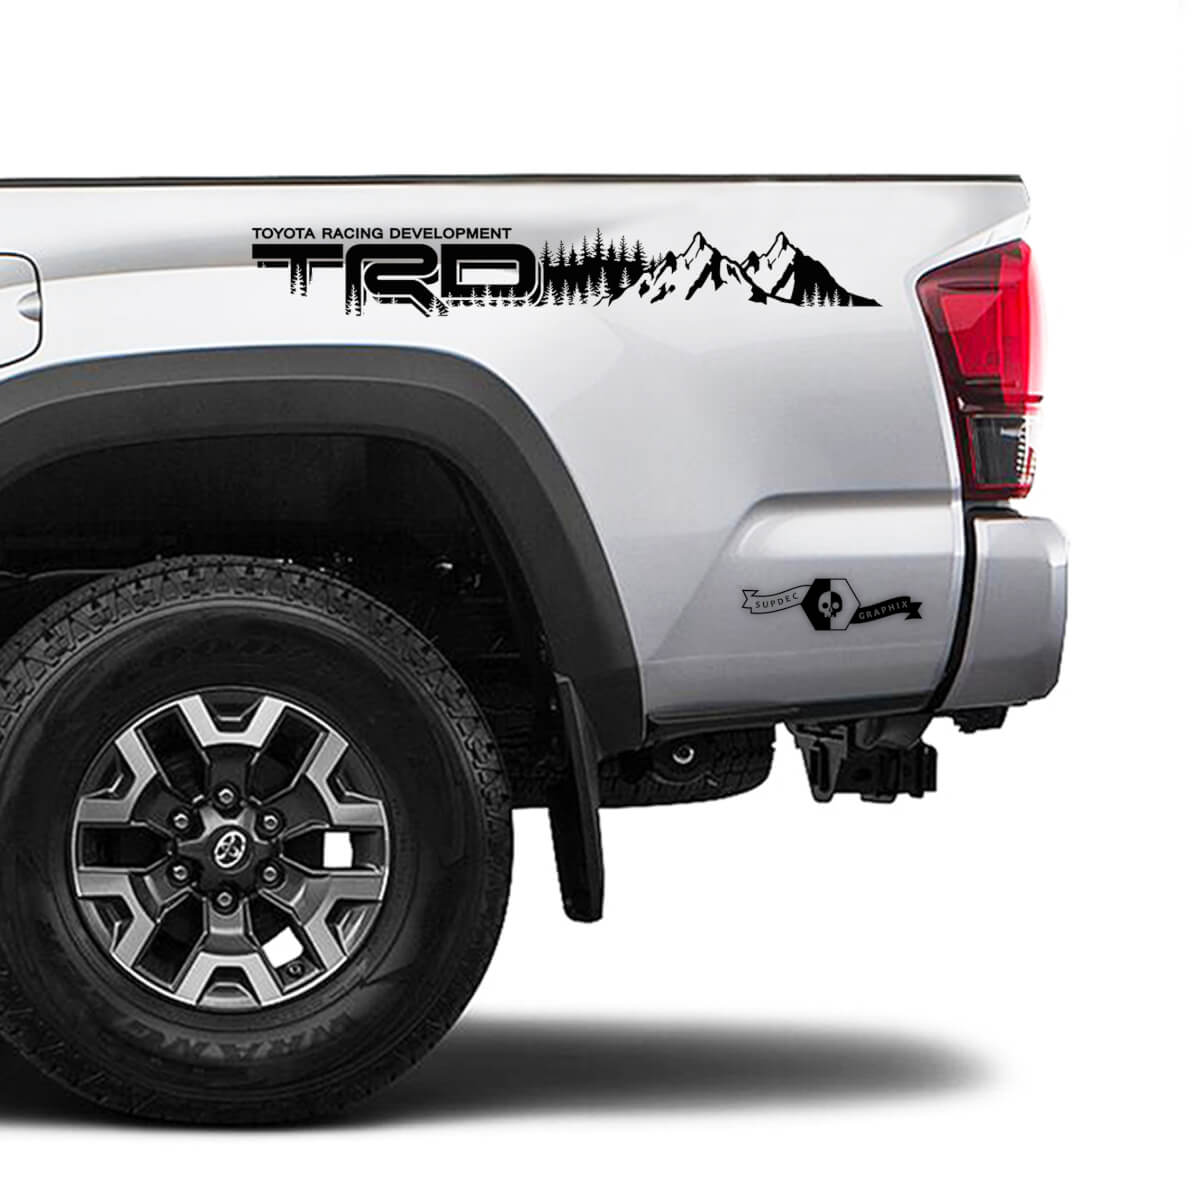 TRD 4x4 Off Road TOYOTA Fit Forest Mountains Decals Stickers for Tacoma Tundra 4Runner Hilux side